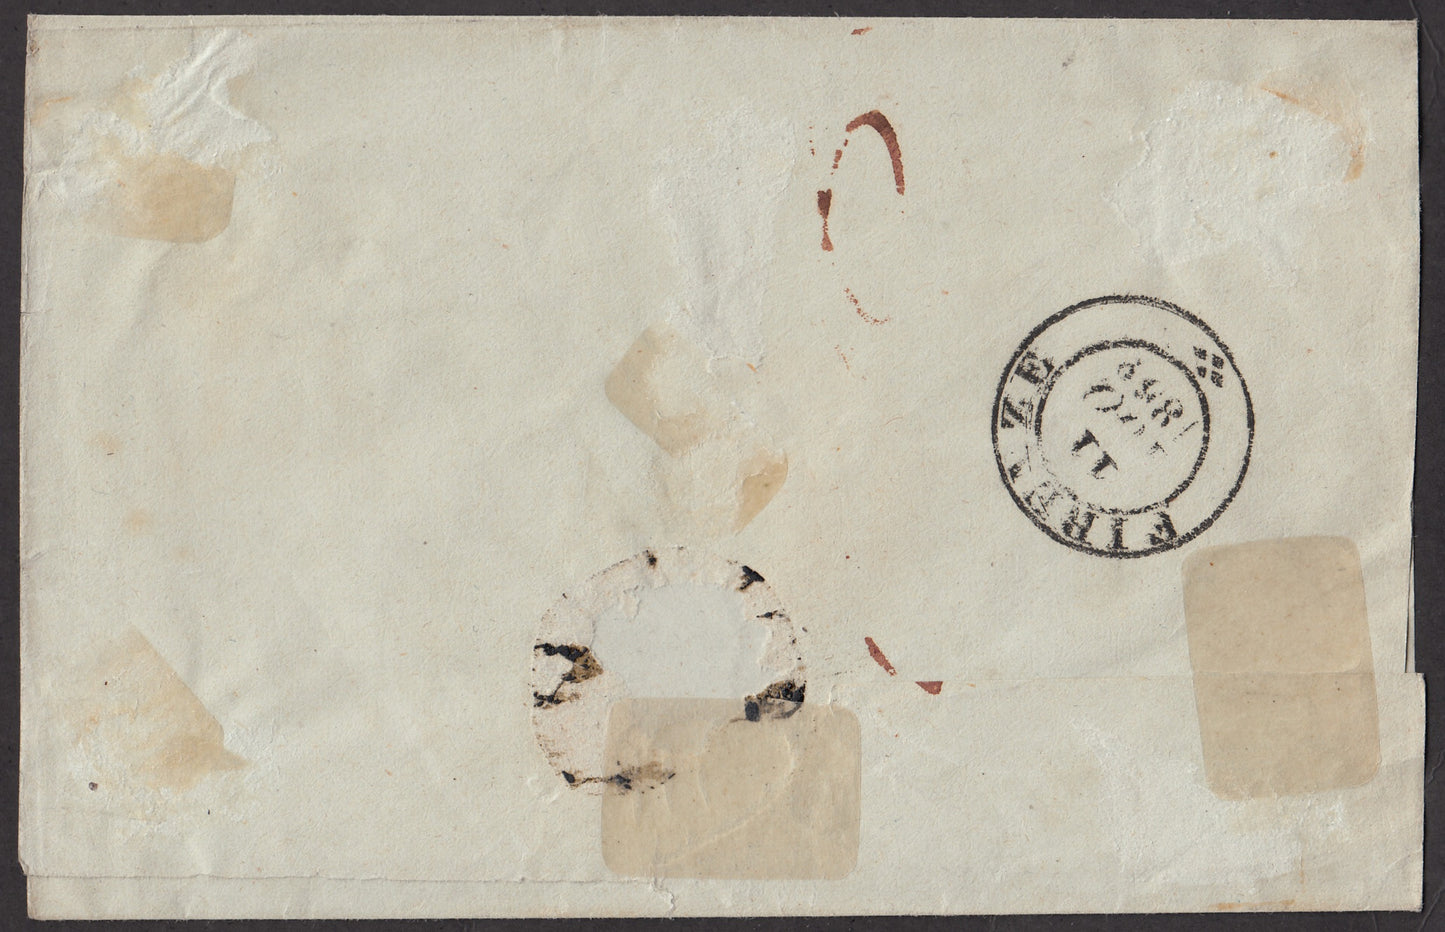 BA23-170 1852 - Letter sent from Rome to Florence franked with 5 light pink baj (6).